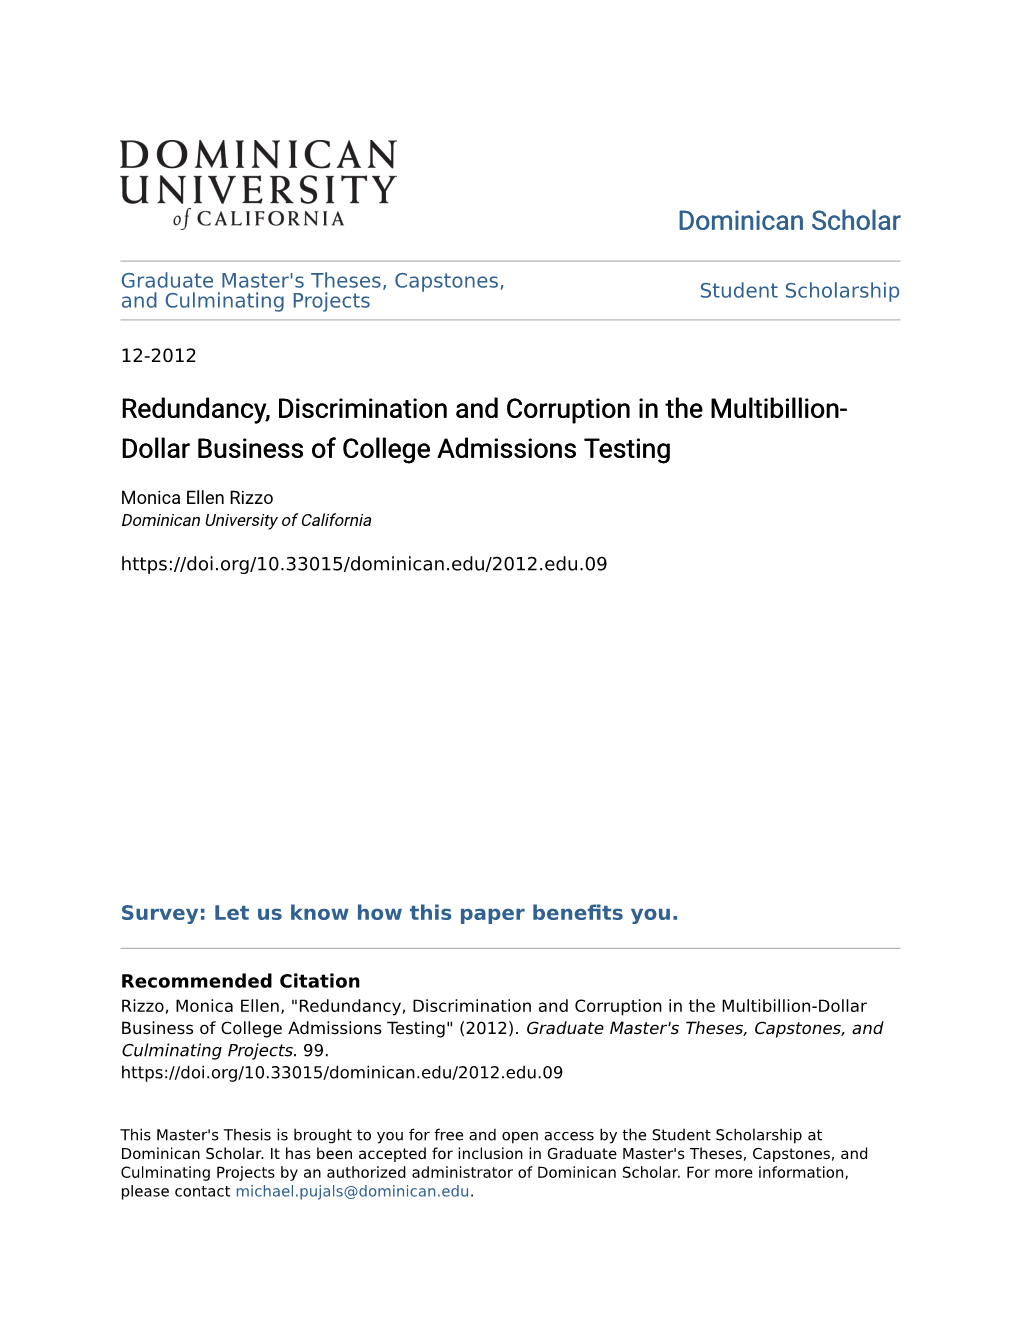 Redundancy, Discrimination and Corruption in the Multibillion-Dollar Business of College Admissions Testing" (2012)